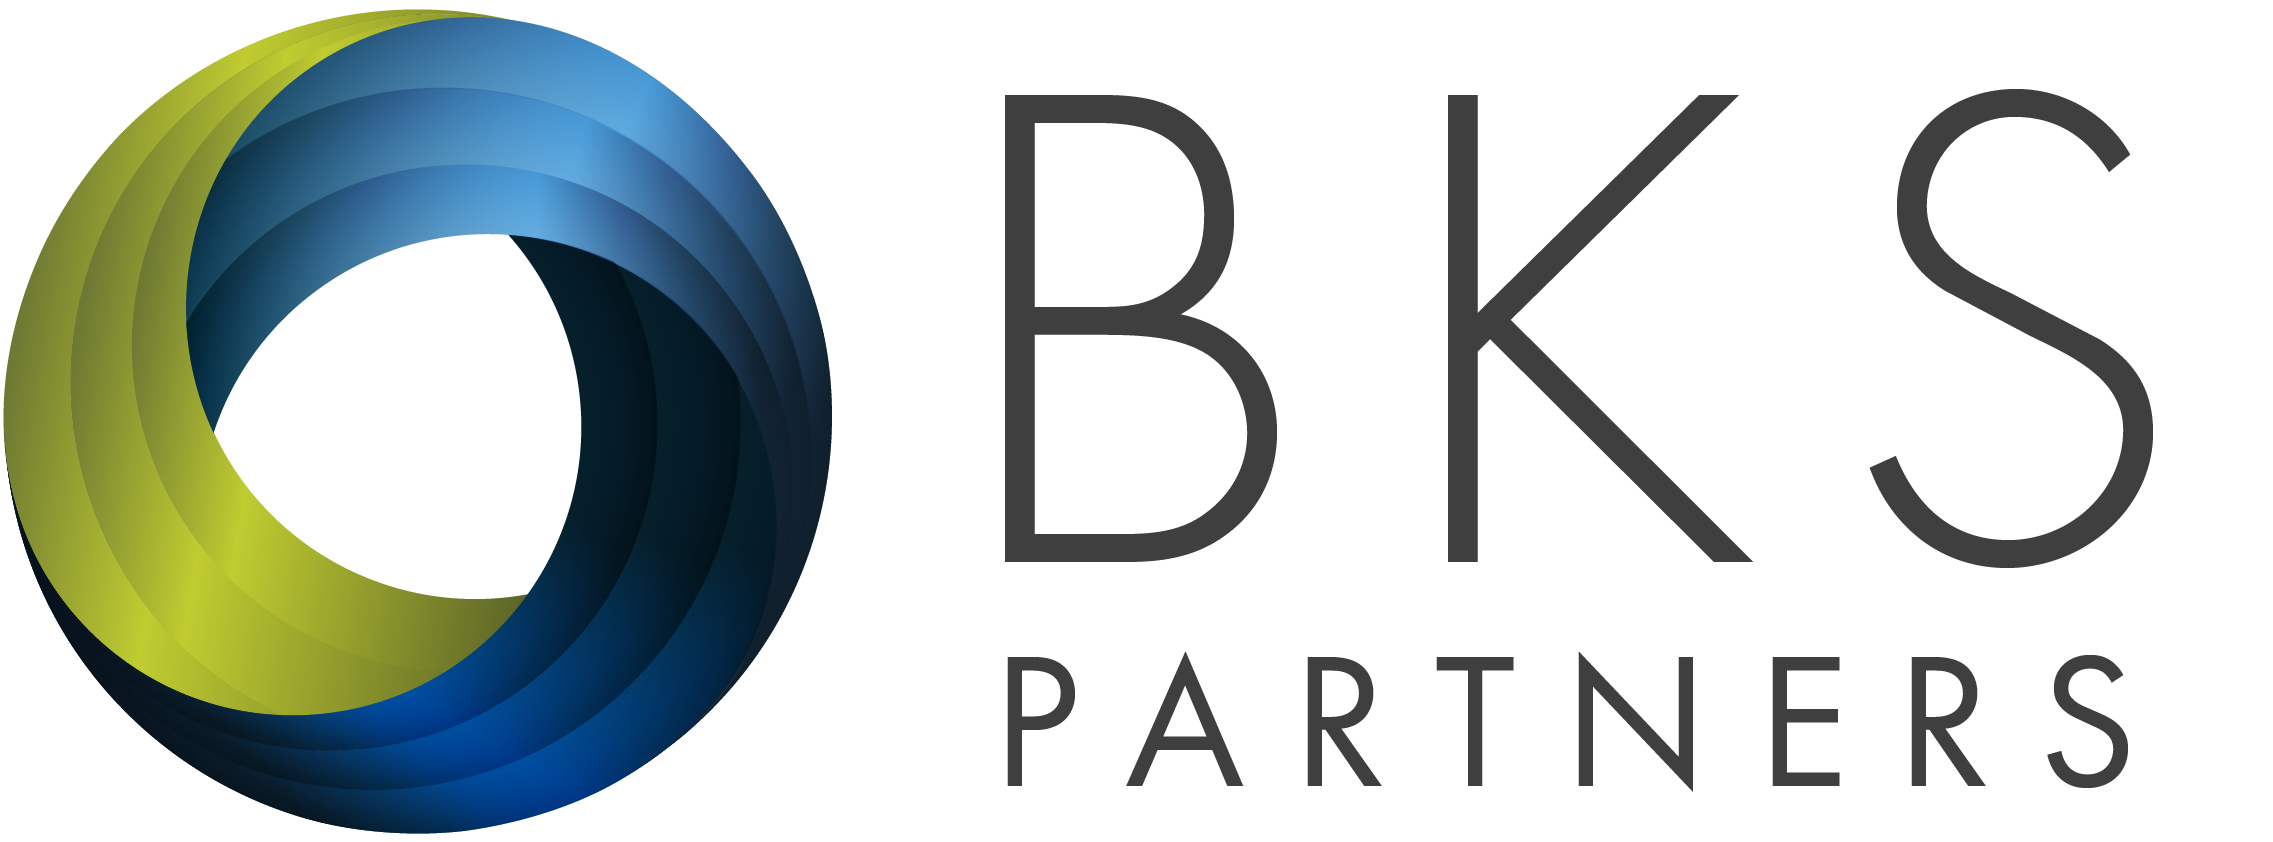 f. BKS Partners (Supporting)